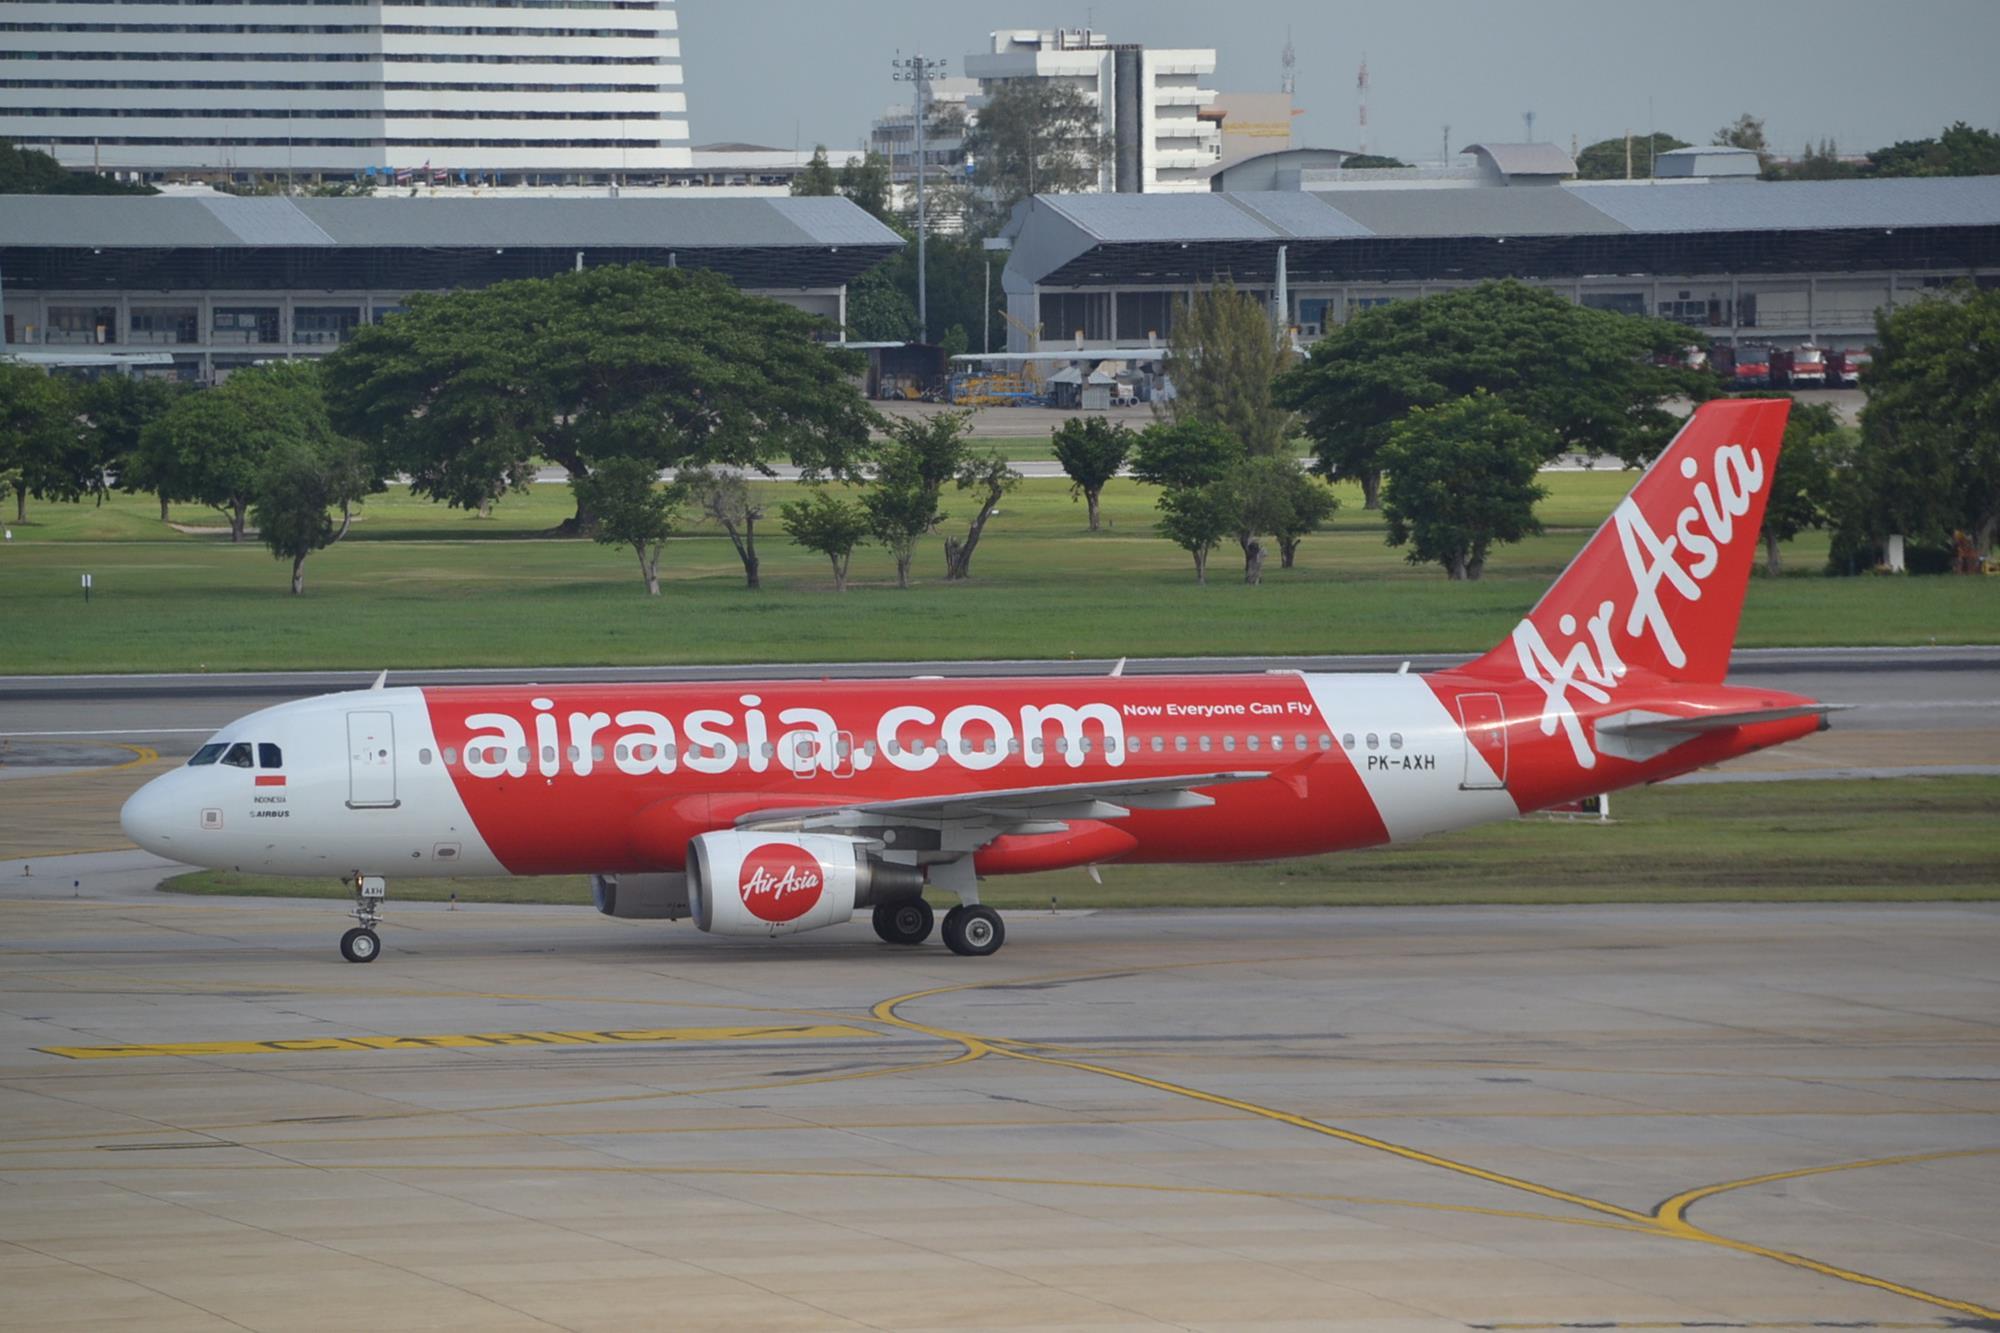 Air Asia's This India campaign aims to bolster the low cost airline's presence in India.